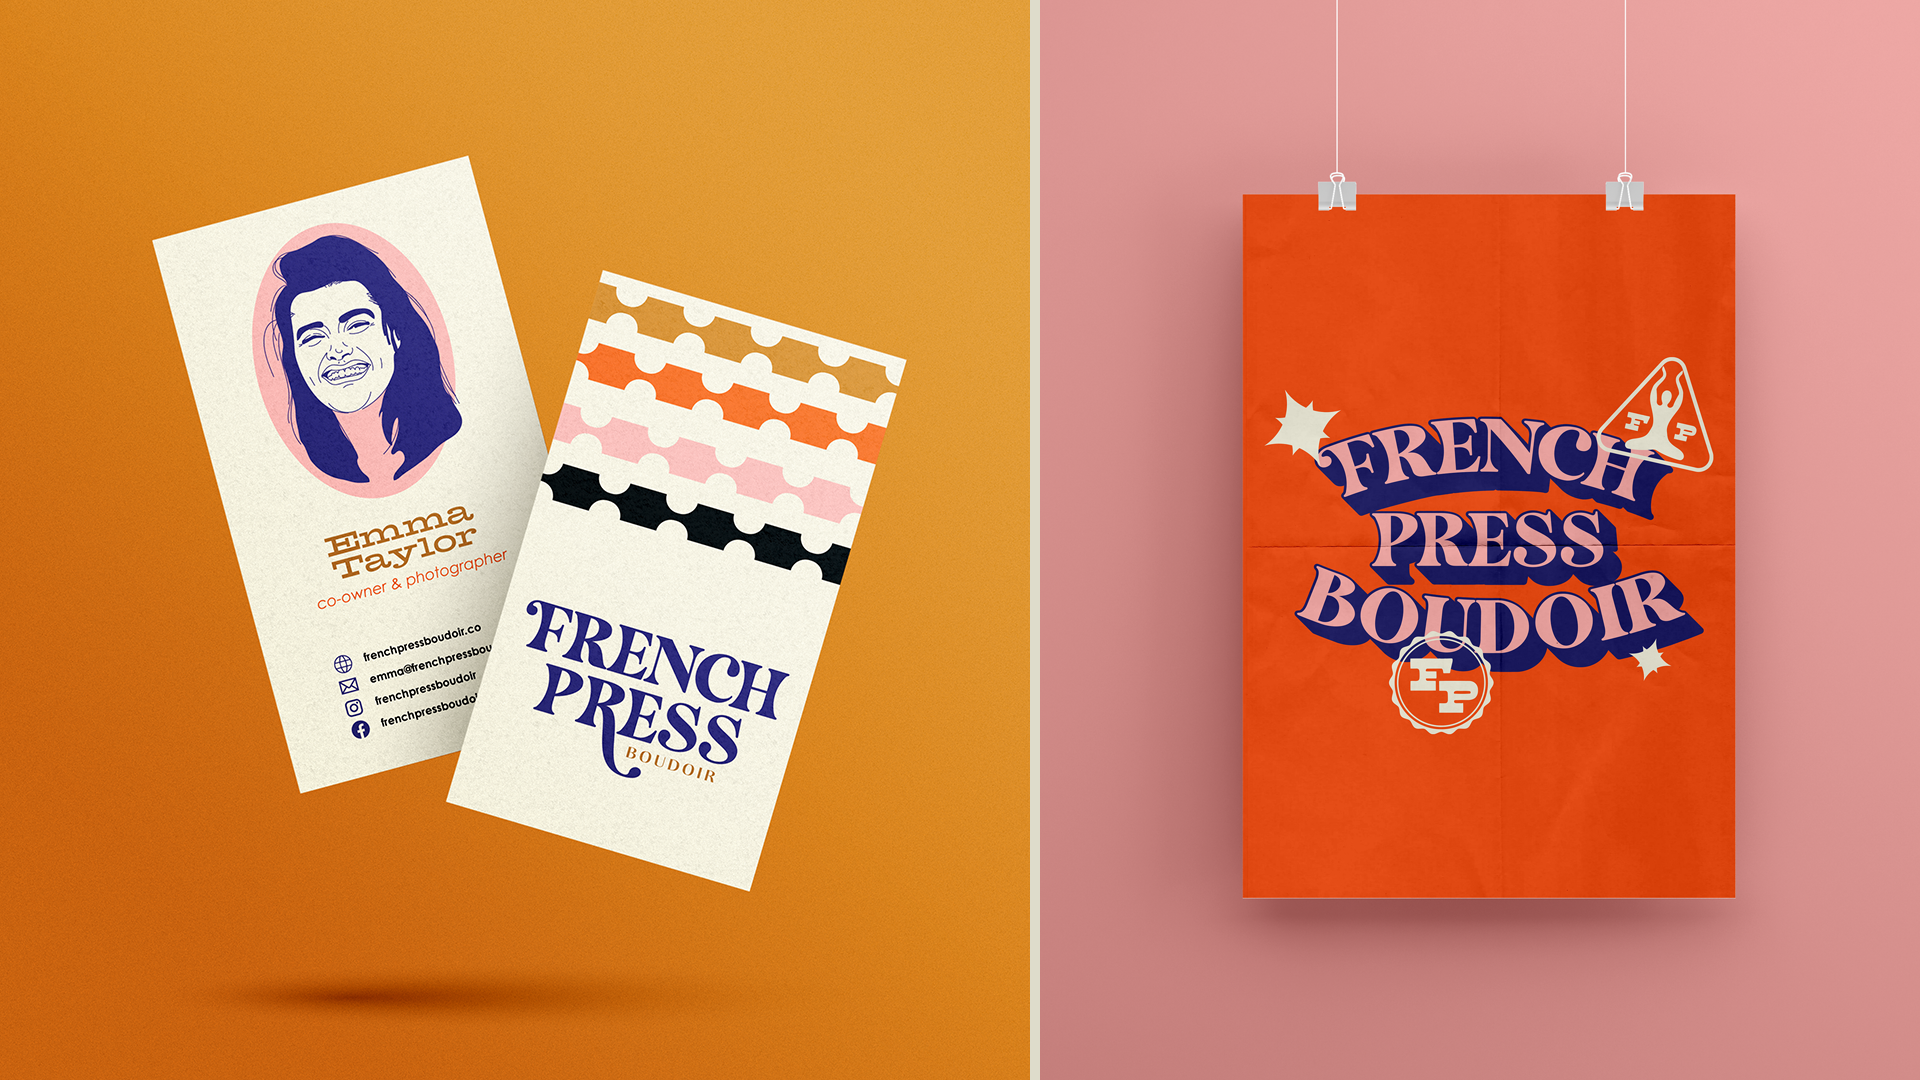 featured image five:French Press Boudoir Branding